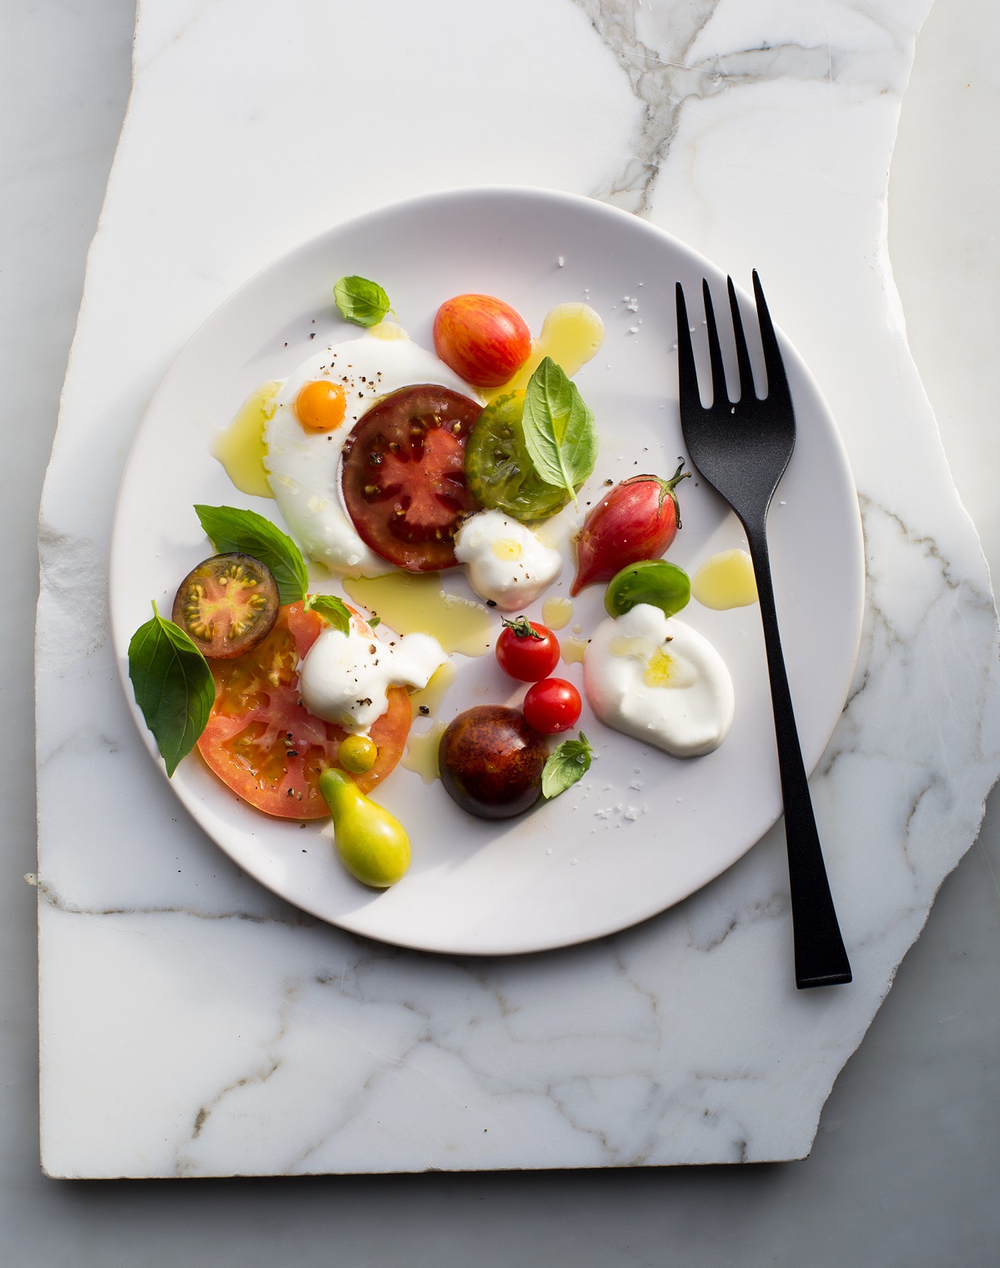 Plate for one of caprese salad